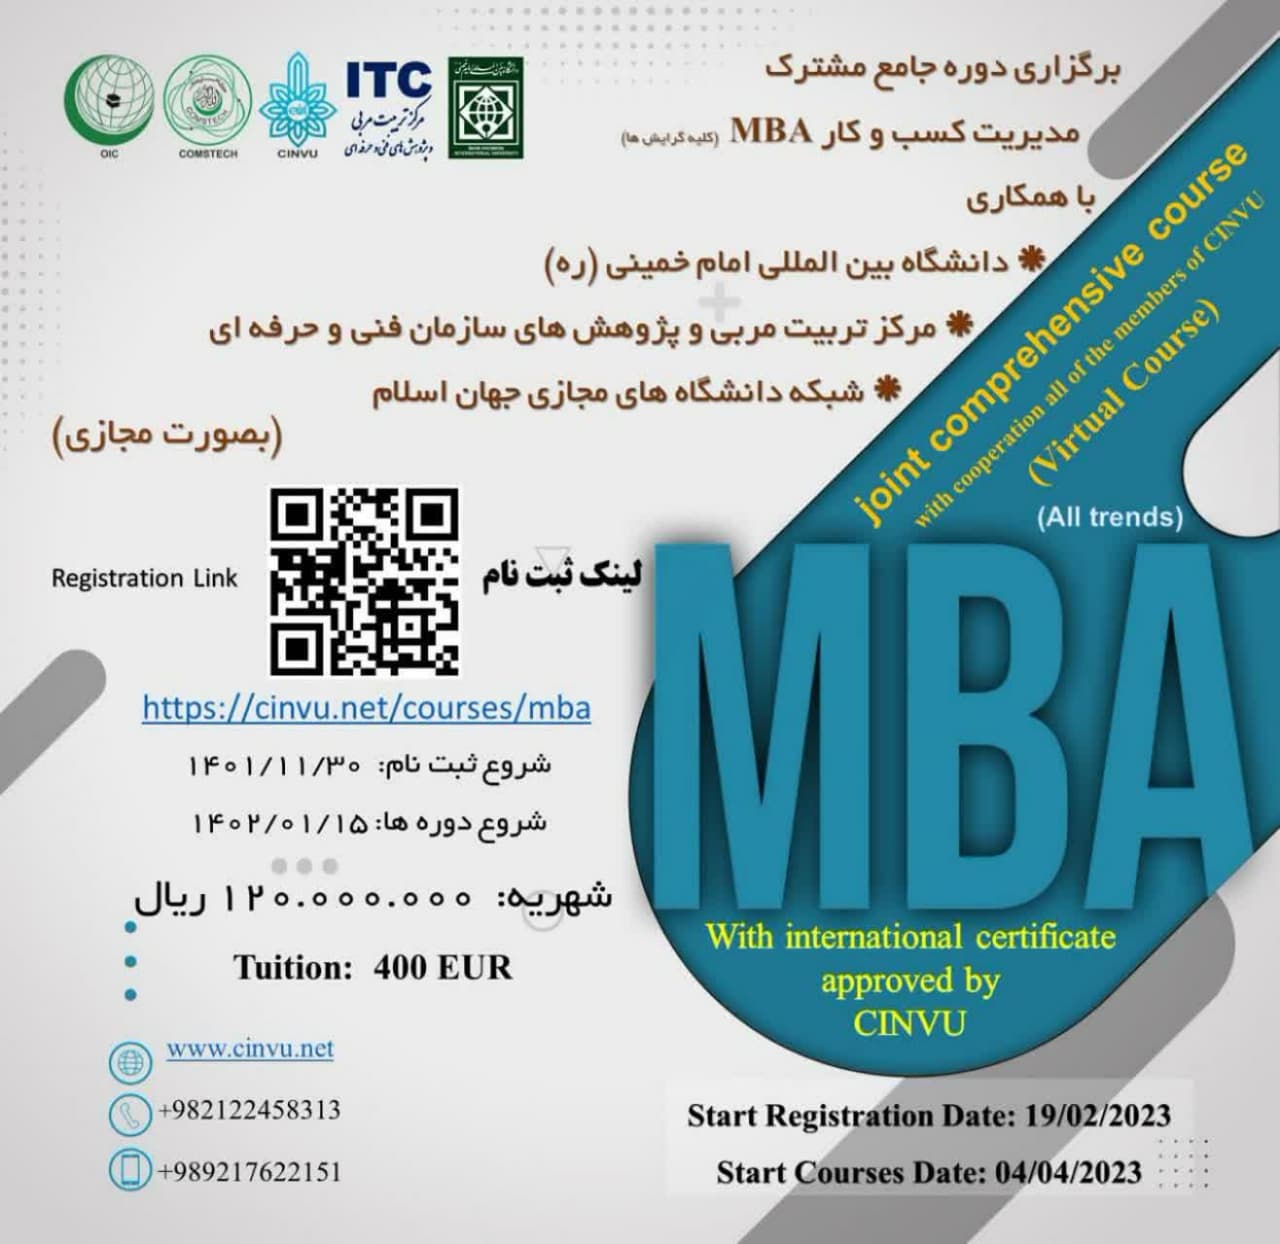 The MBA Course